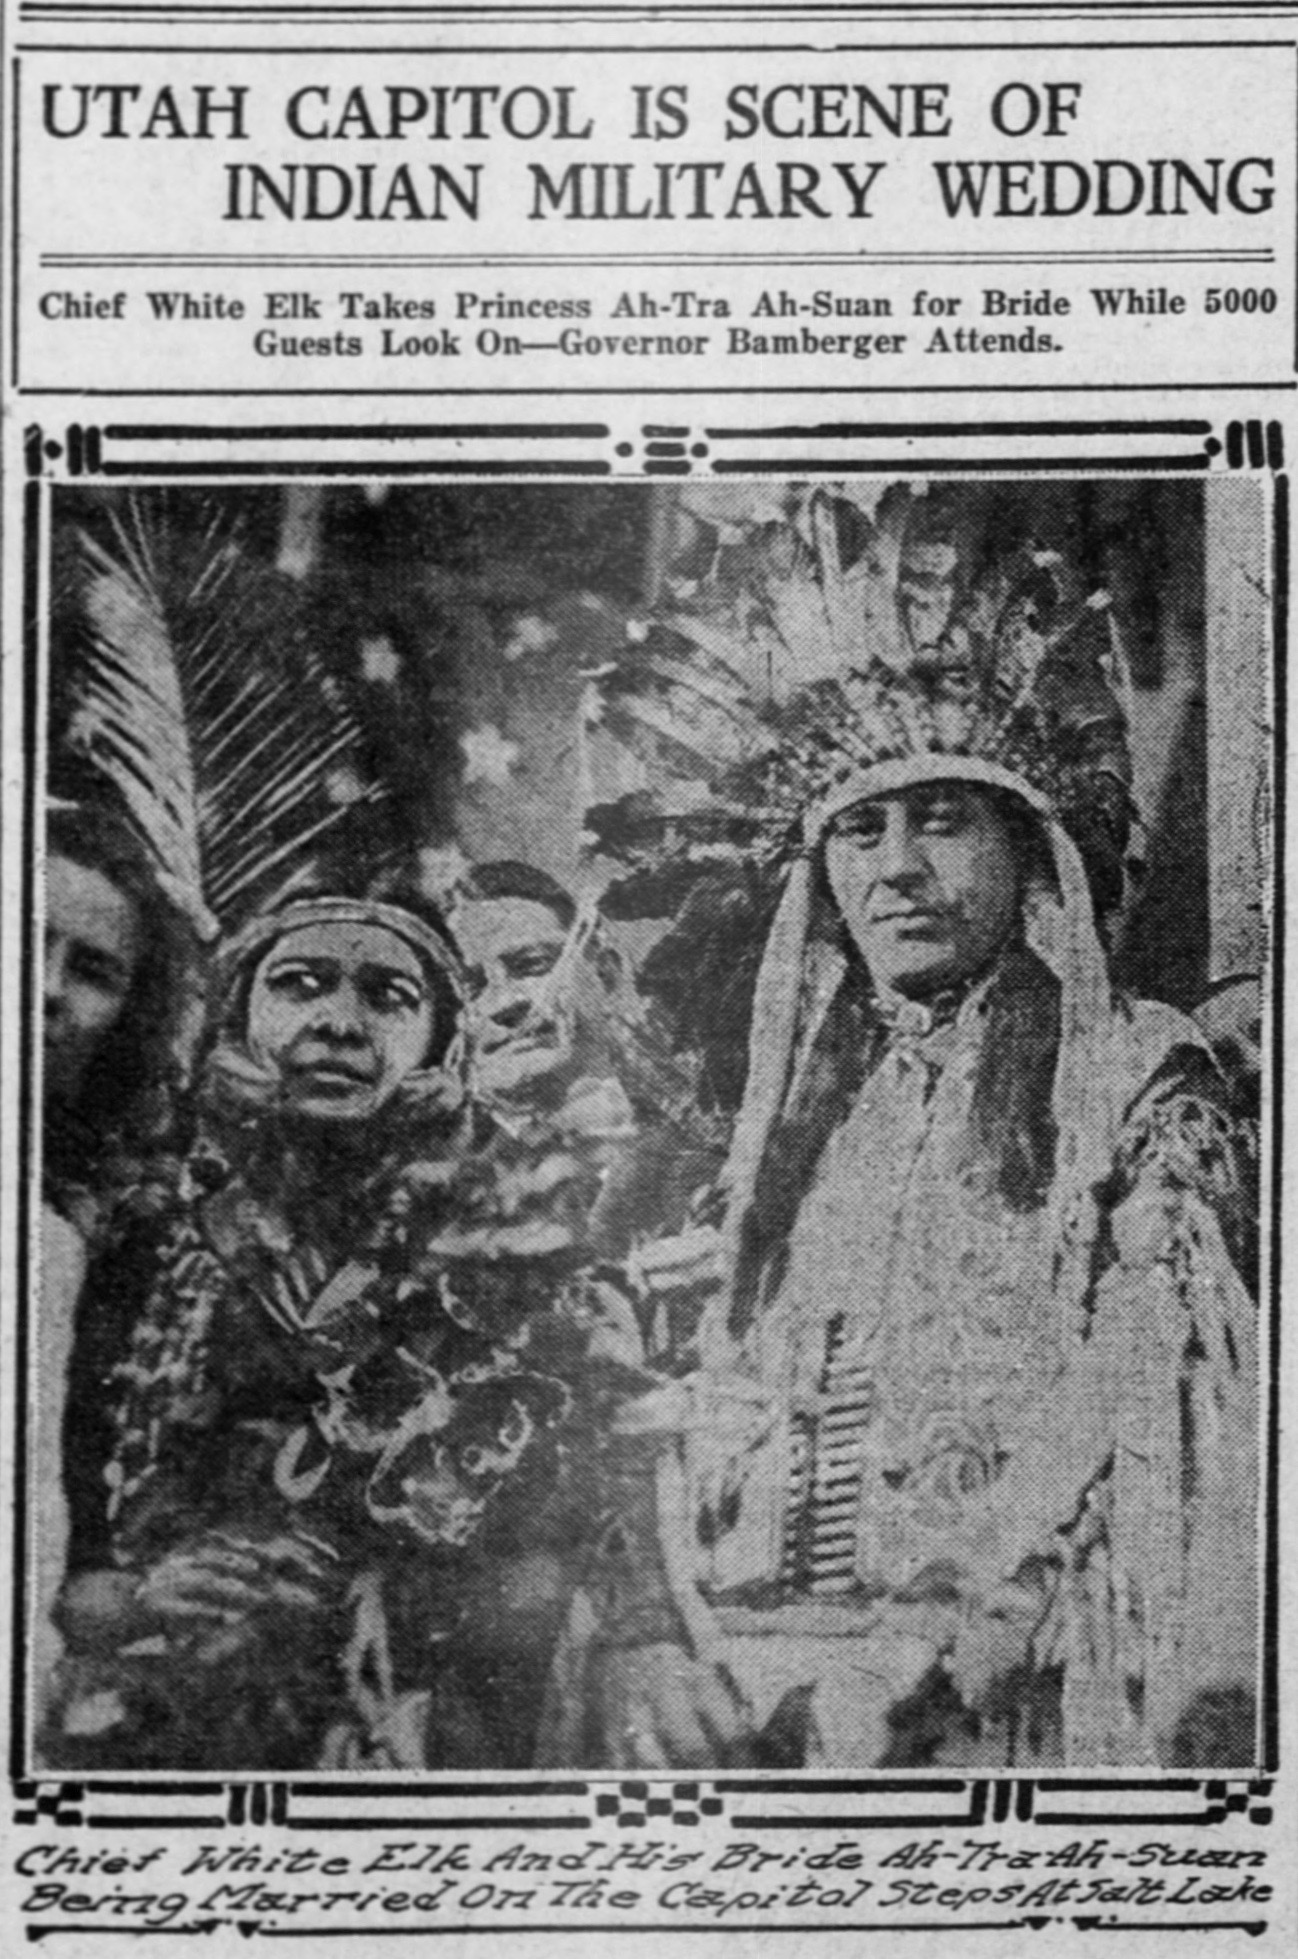 Newspaper story about Chief White Elk's first marriage, March 1918.